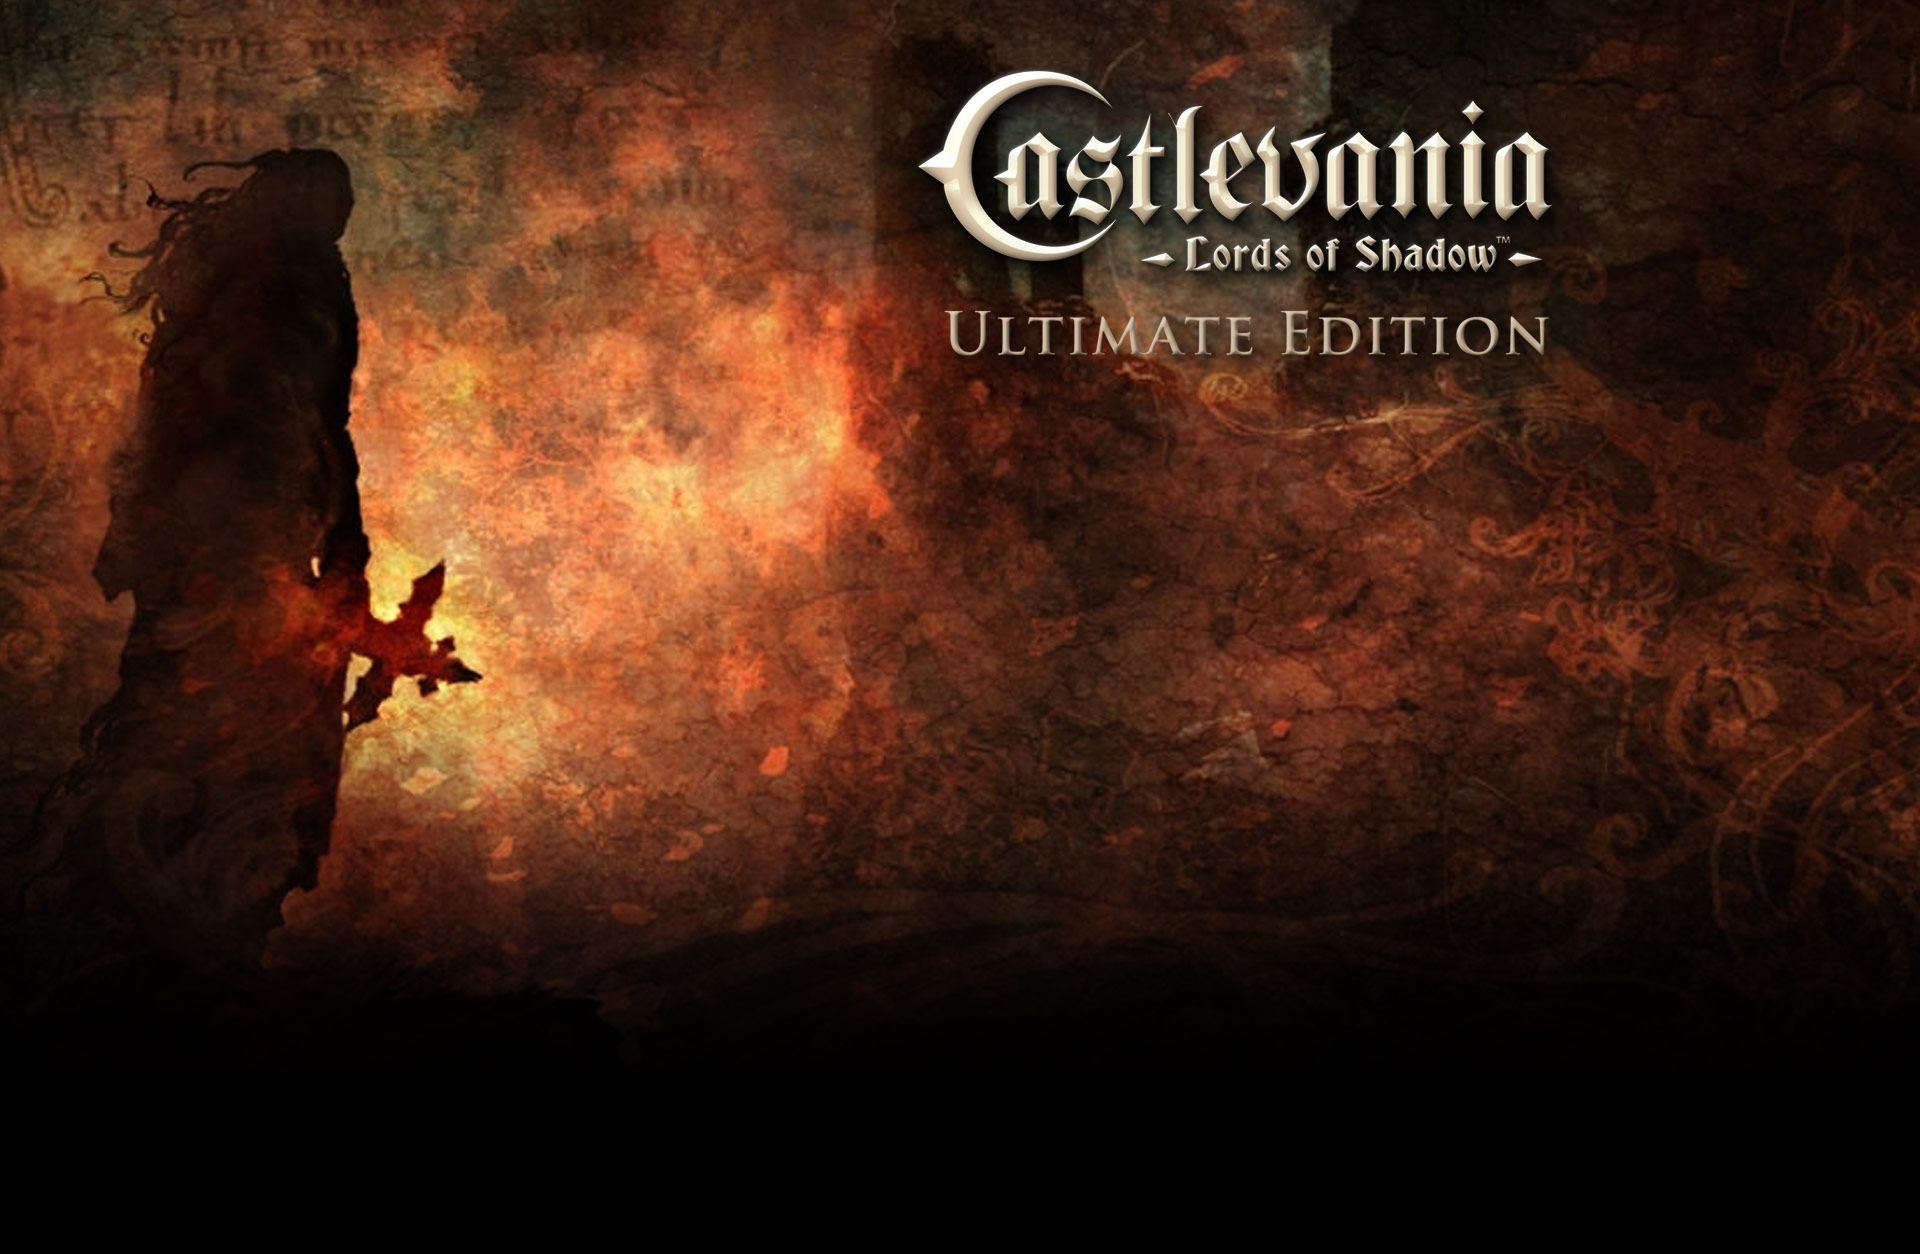 Buy Castlevania: Lords of Shadow 2 on GAMESLOAD